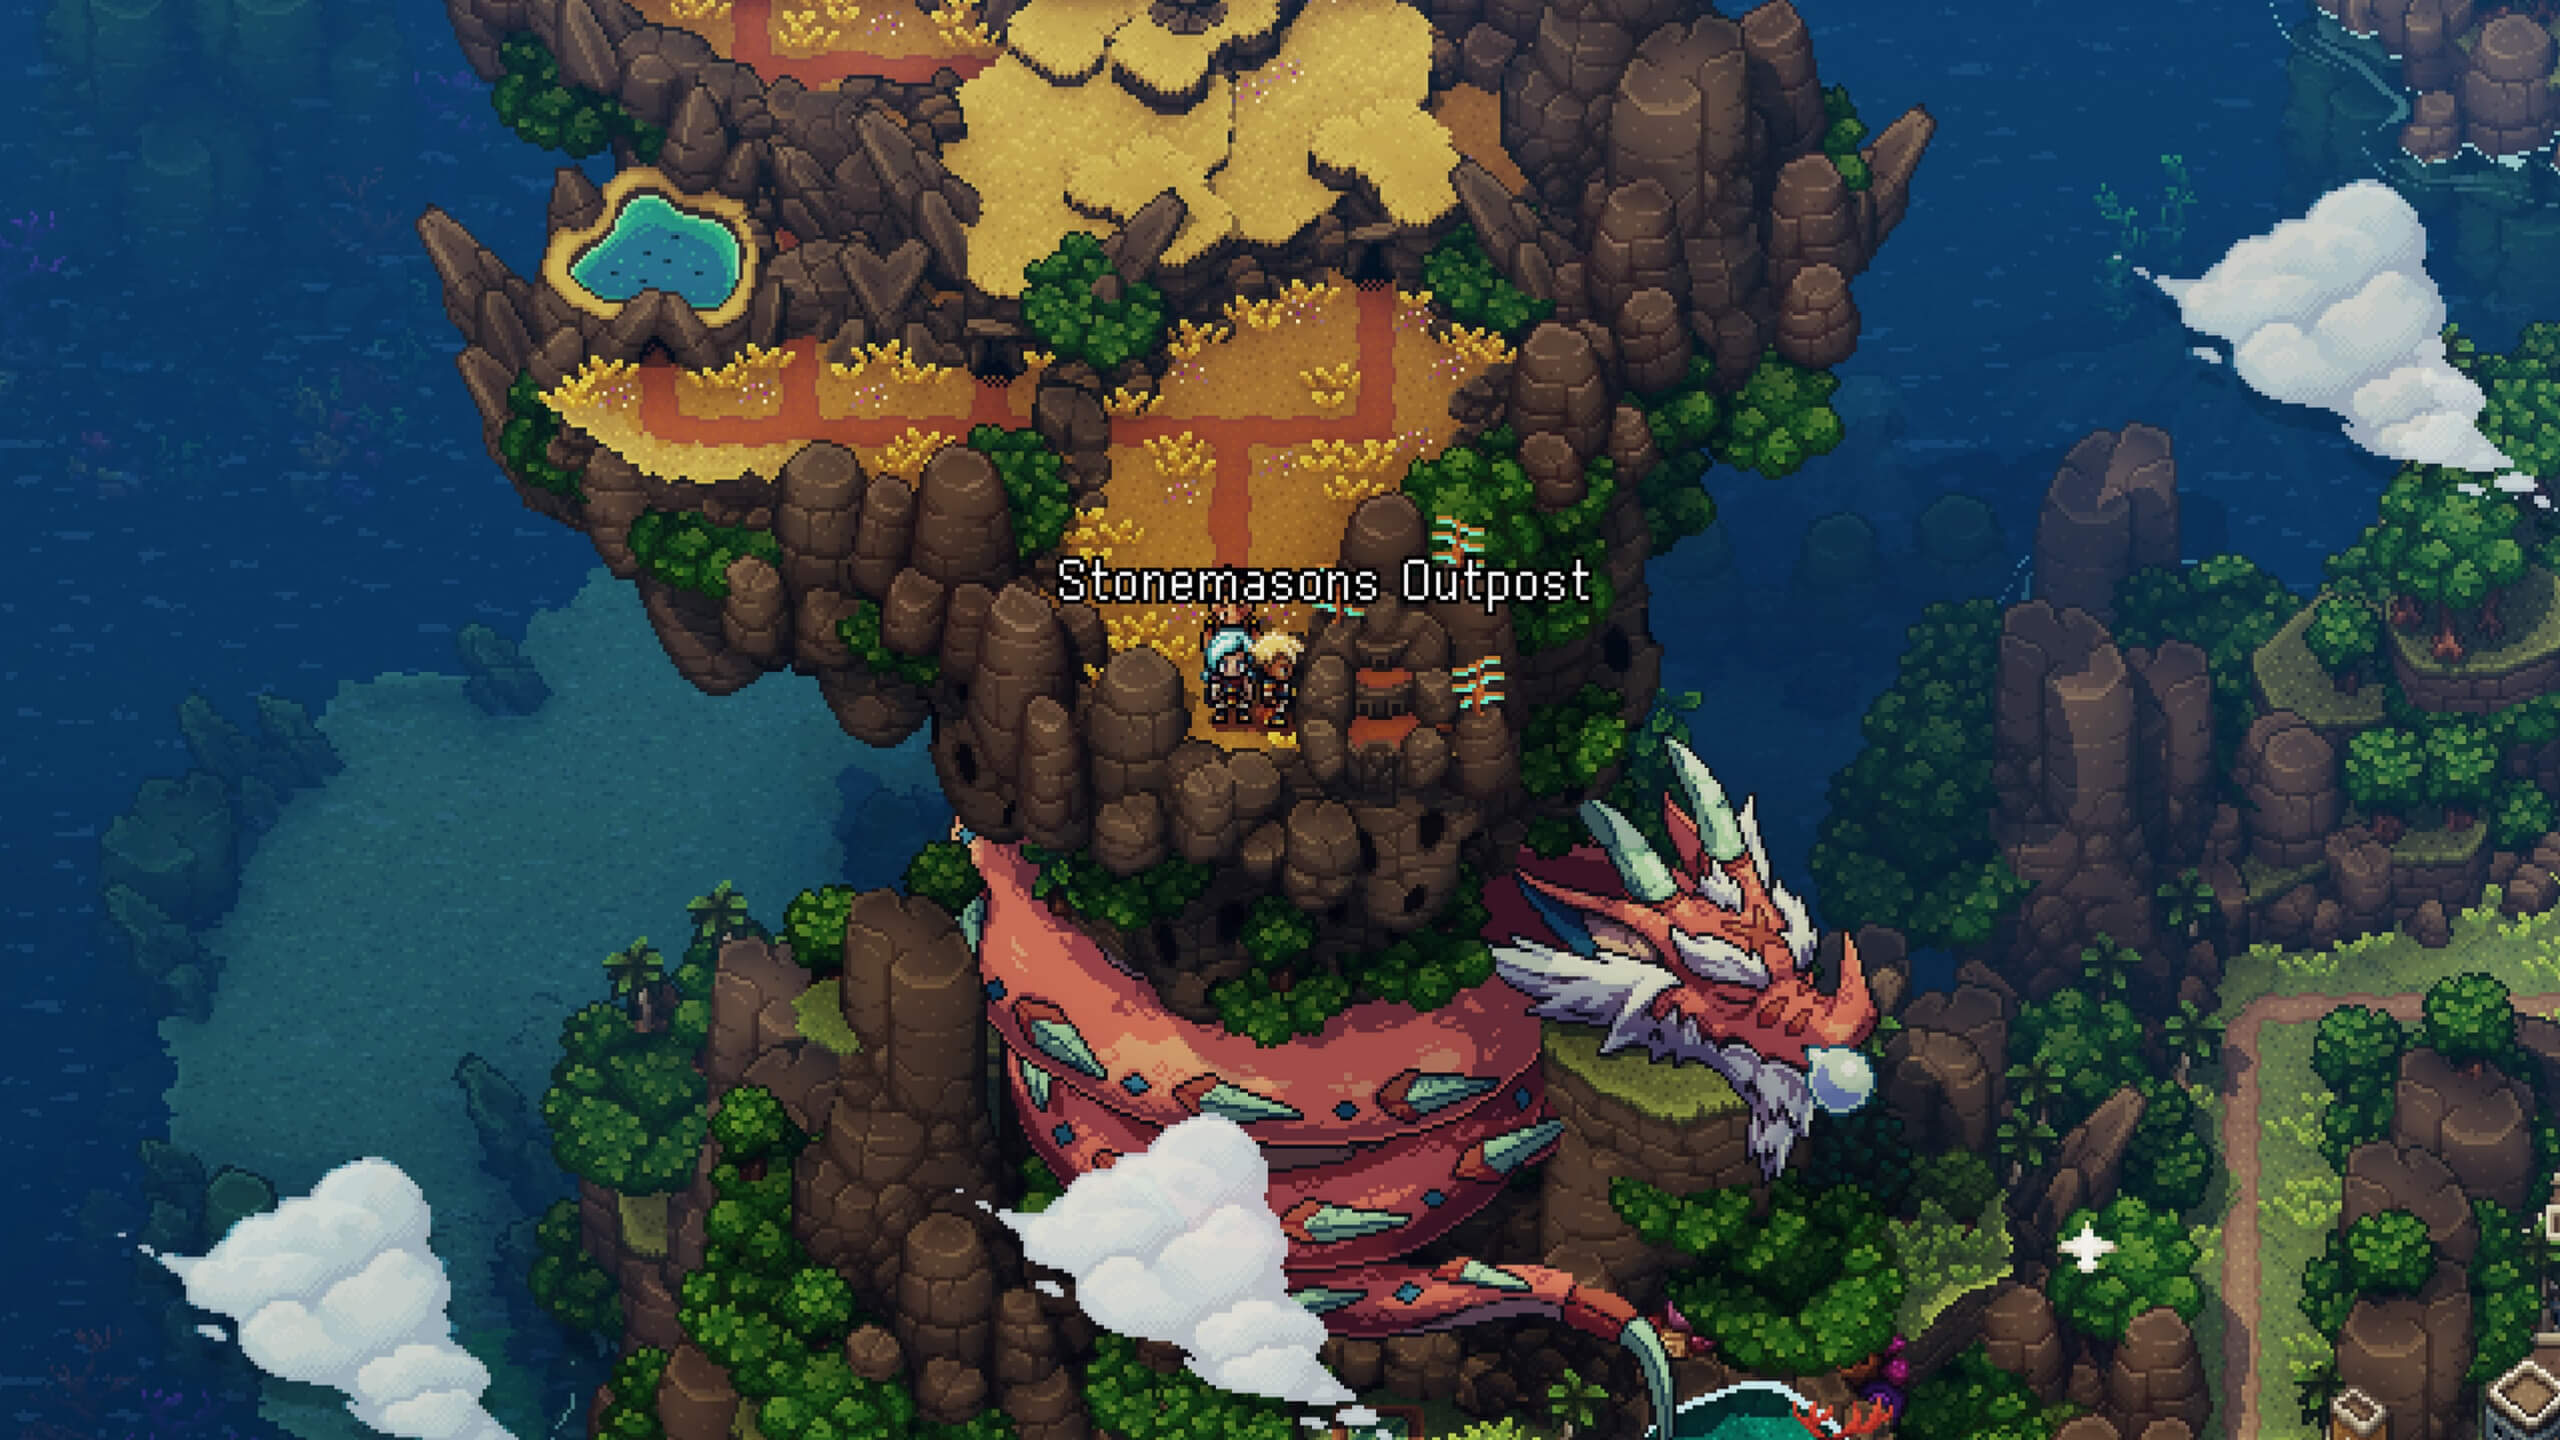 This is a shot of the overworld in the game. I am standing outside my next destination call Stonemason Outpost. below is a sleeping dragon which as of this point doesn't have any affect on the story.